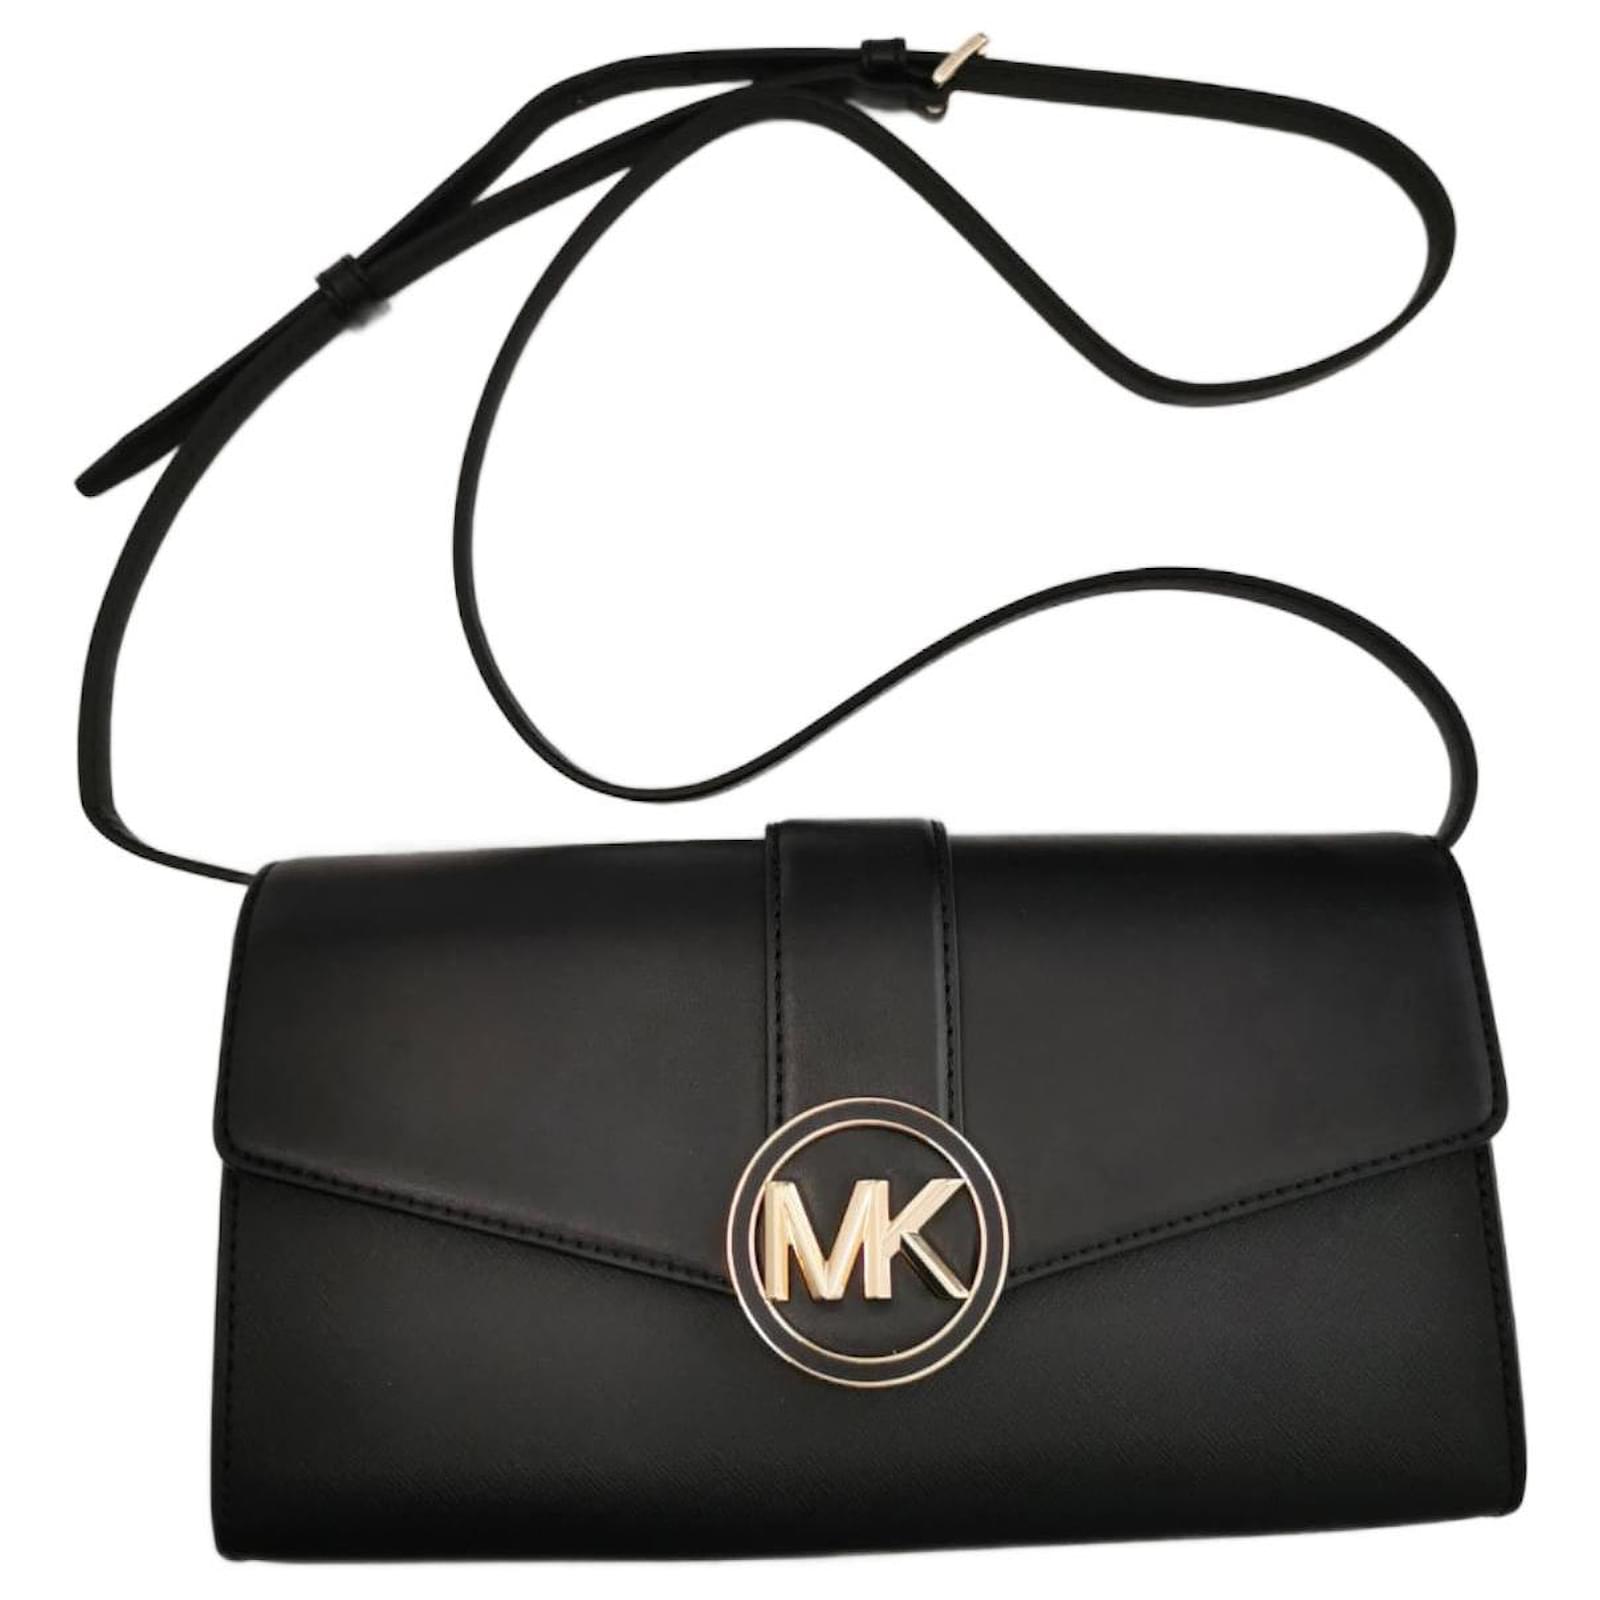 Michael Kors purse: Get up to 70% off right now - Reviewed